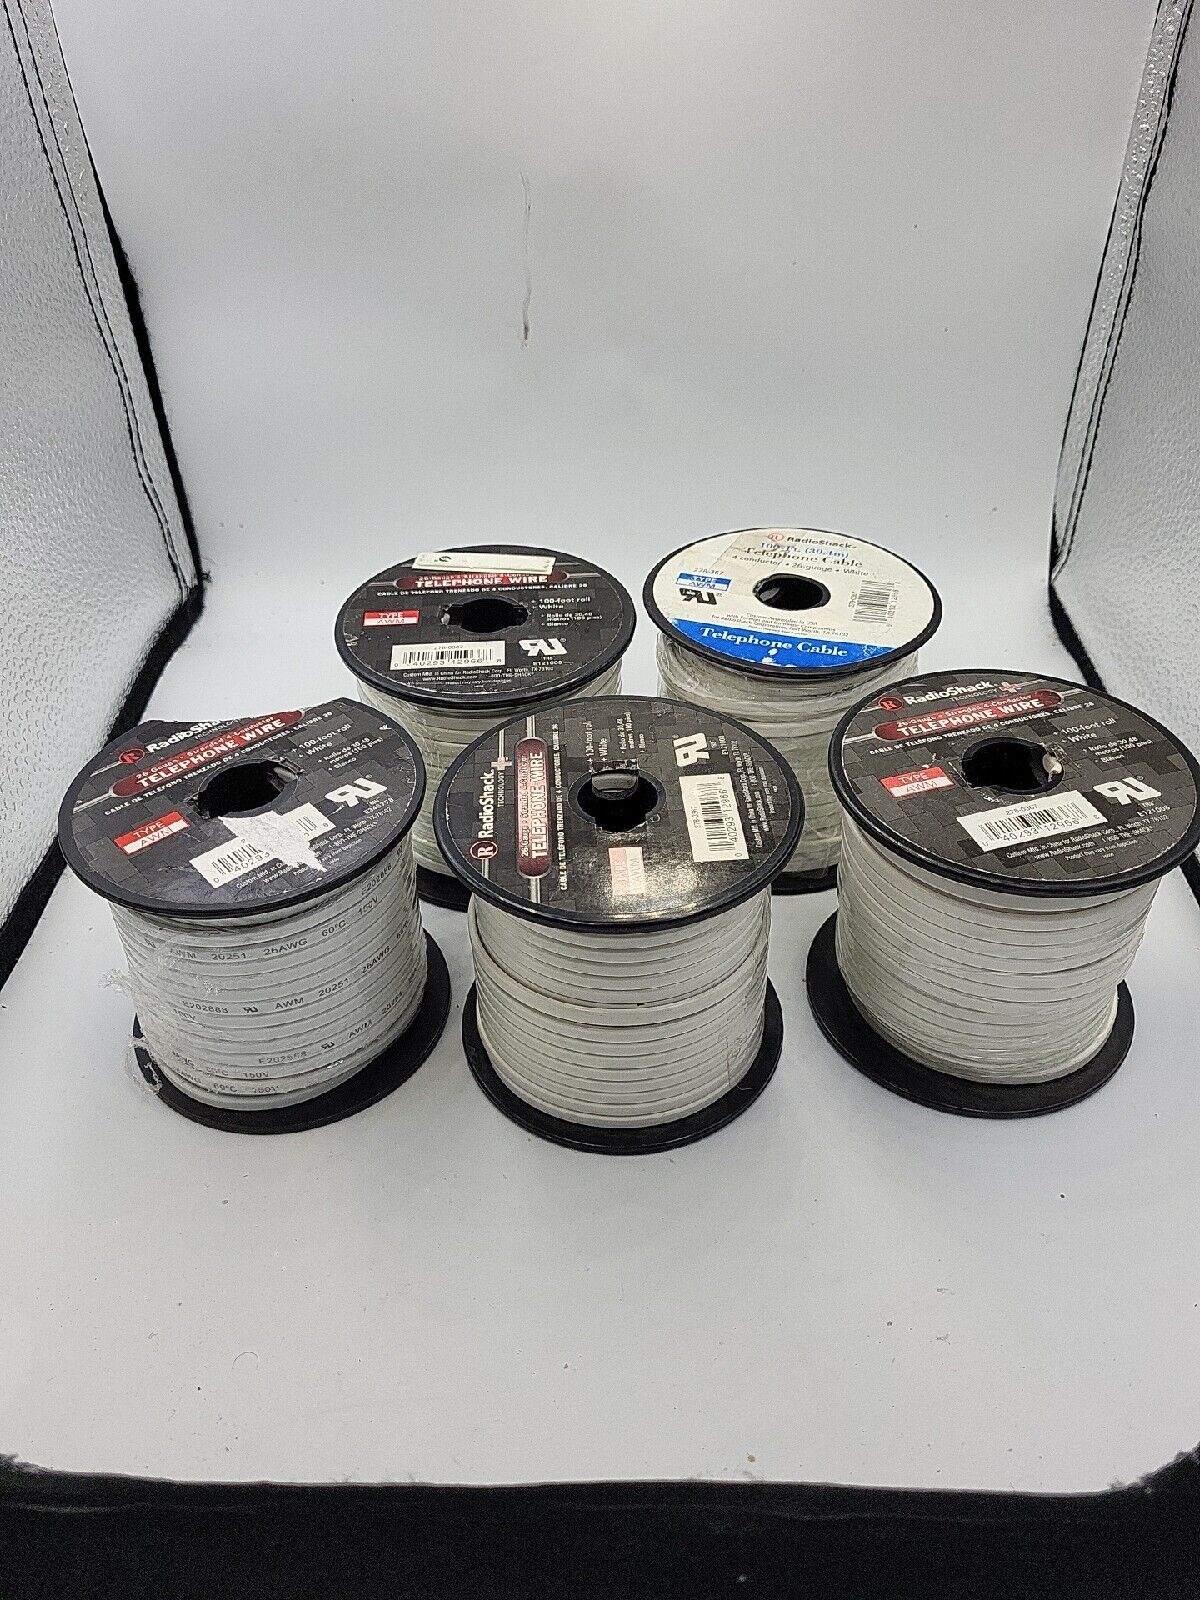 Radio Shack, 26 Gauge, Stranded 4 Conductor Telephone Wire, 100 Ft Roll Lot Of 5